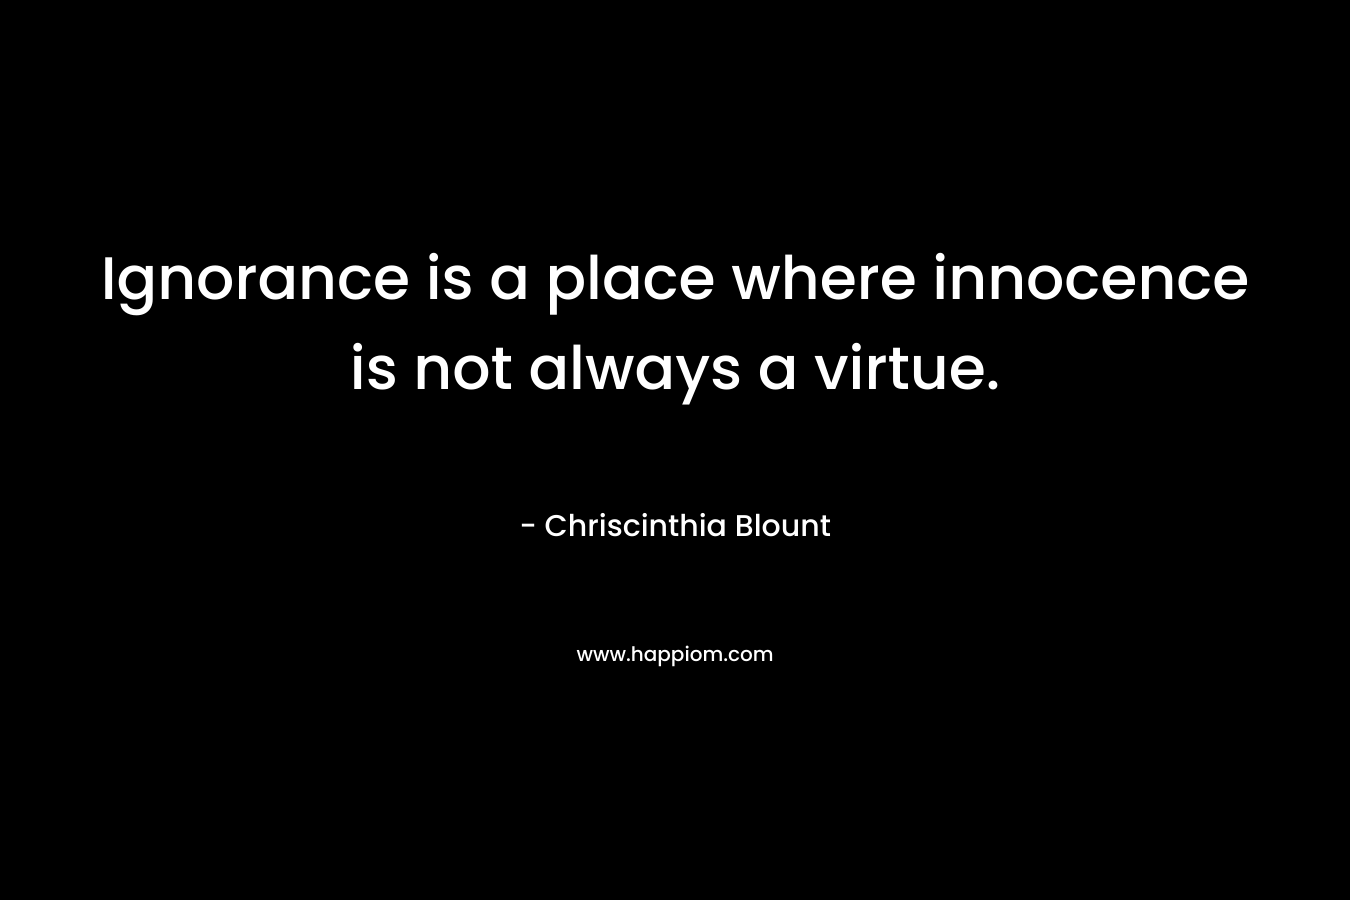 Ignorance is a place where innocence is not always a virtue.